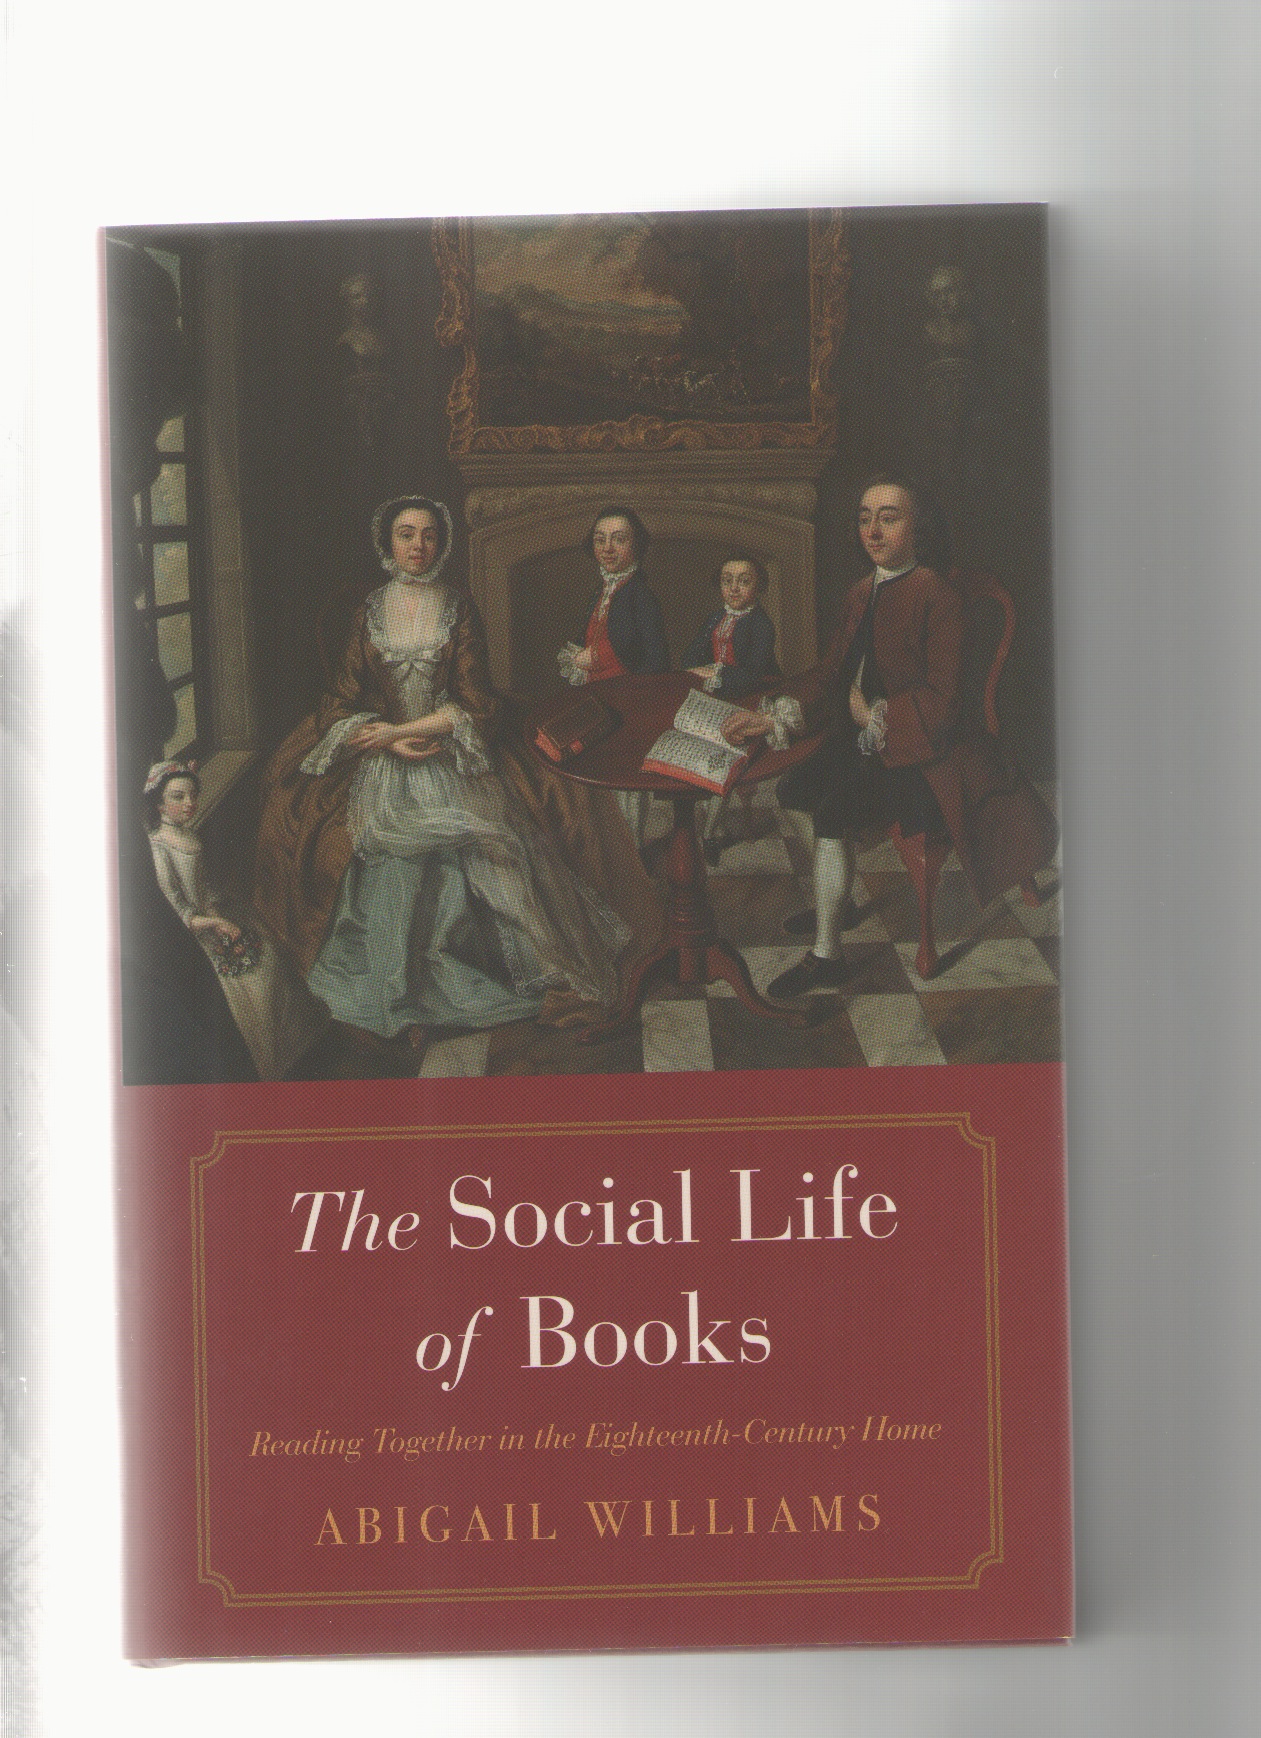 WILLIAMS, Abigail - The Social Life of Books. Reading Together in the Eighteenth-Century Home